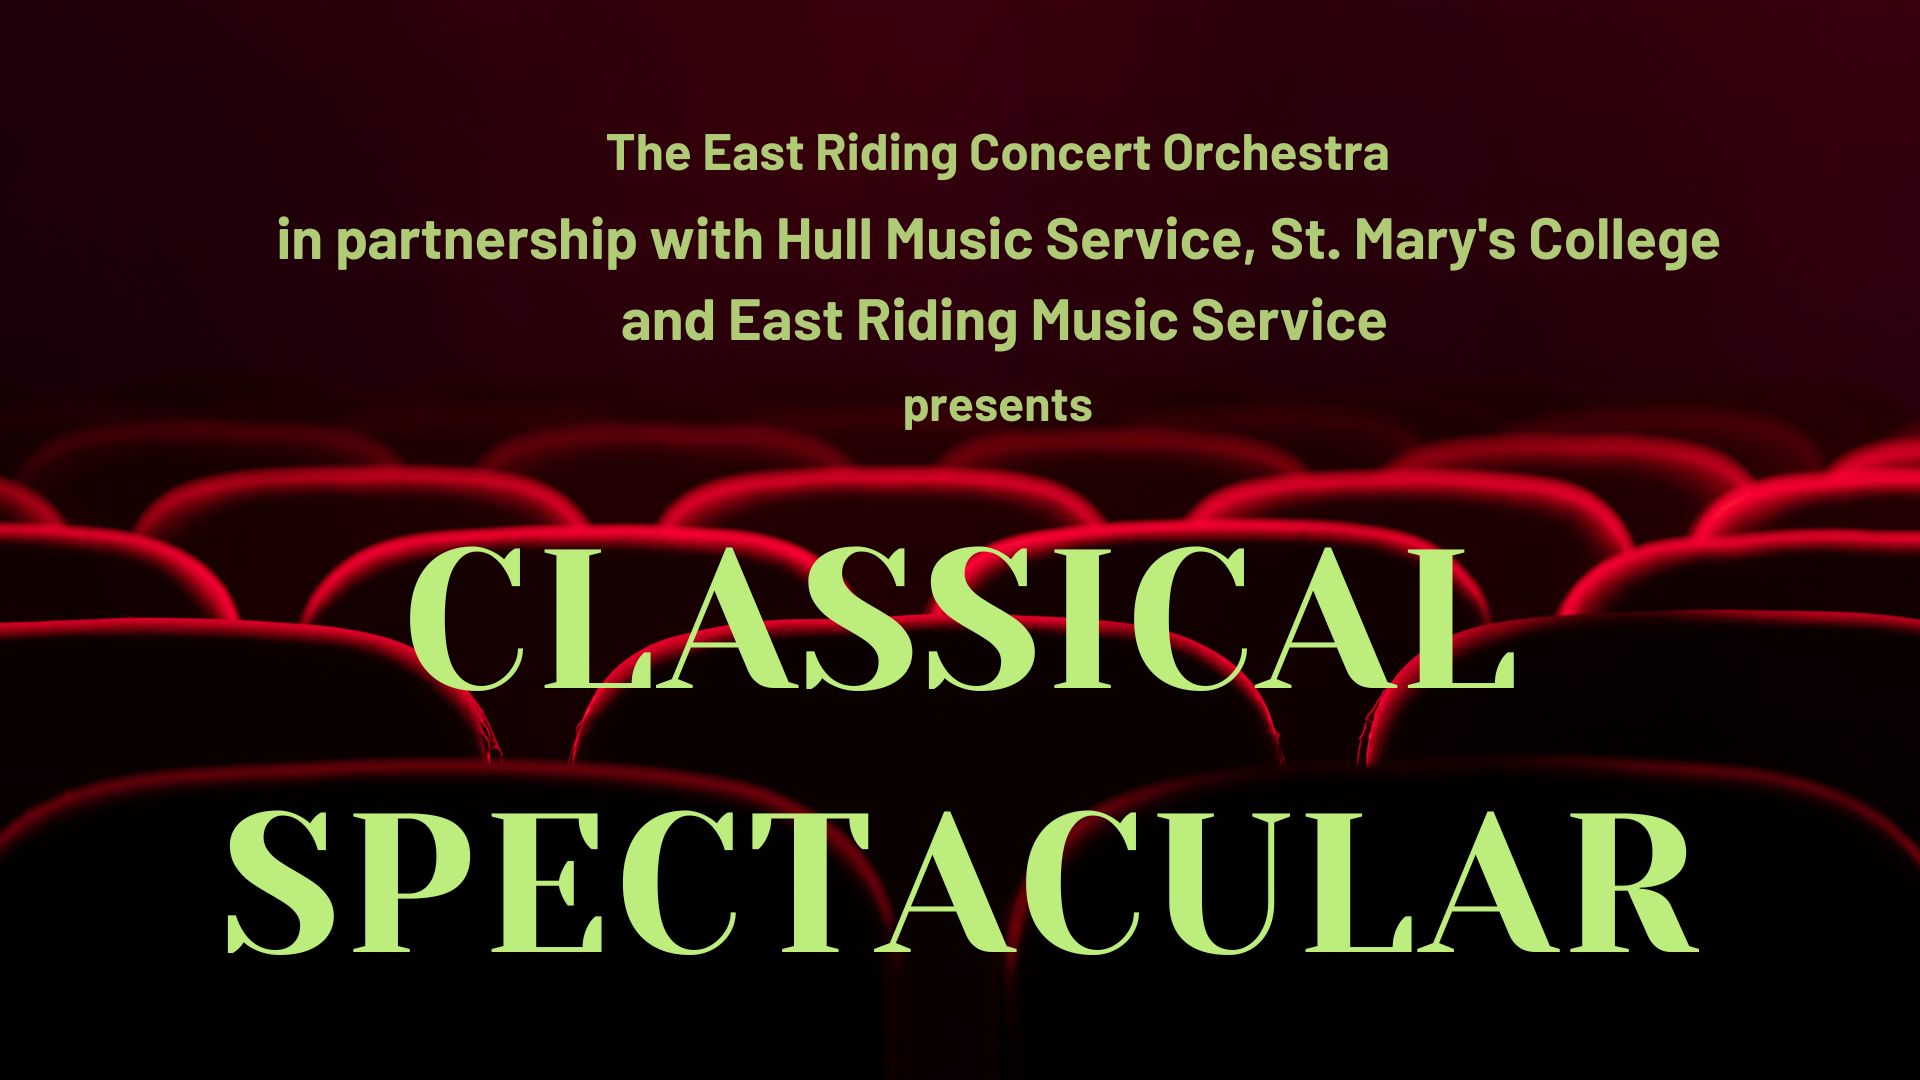 The East Riding Concert Orchestra presents Classical Spectacular